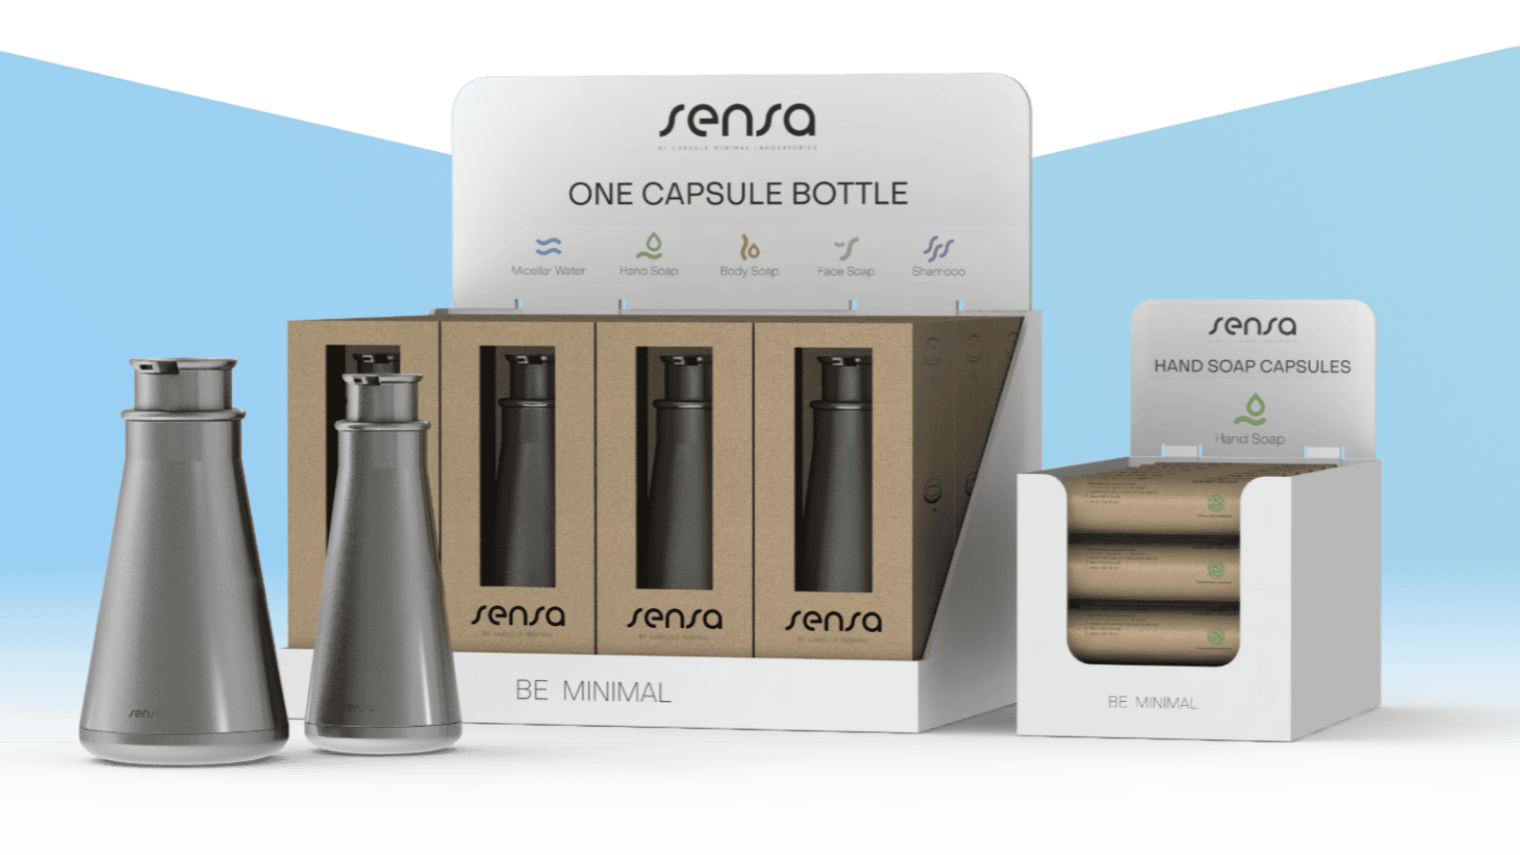 Capsule Minimal's refillable solution aims for consumers to stop using billions of personal care product bottles. Photo courtesy of Capsule Minimal via Israel21c